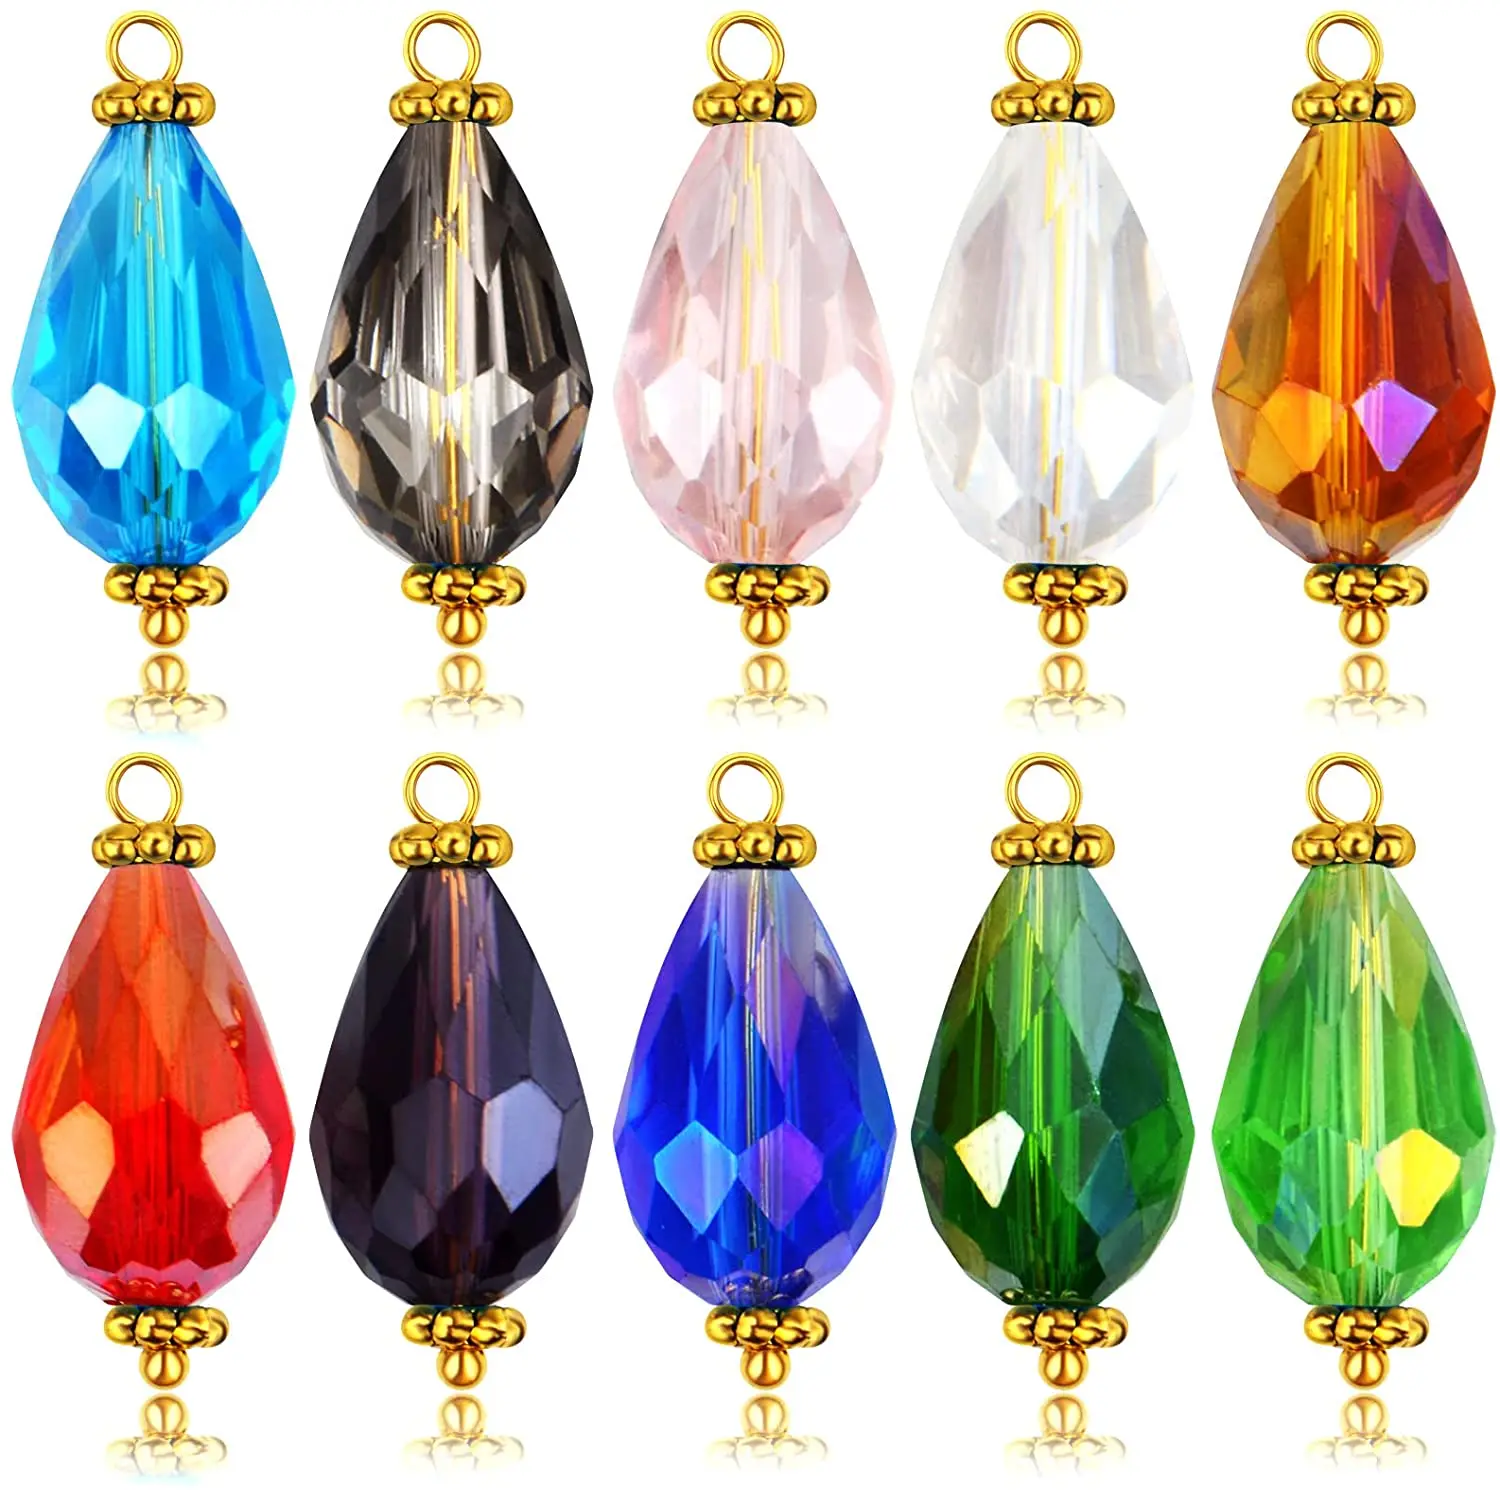 

50pcs Oval Teardrop Crystal Bead Colorful Faceted Glass Dangle Pendants with Golden Bead Caps for DIY Earrings Jewelry Making